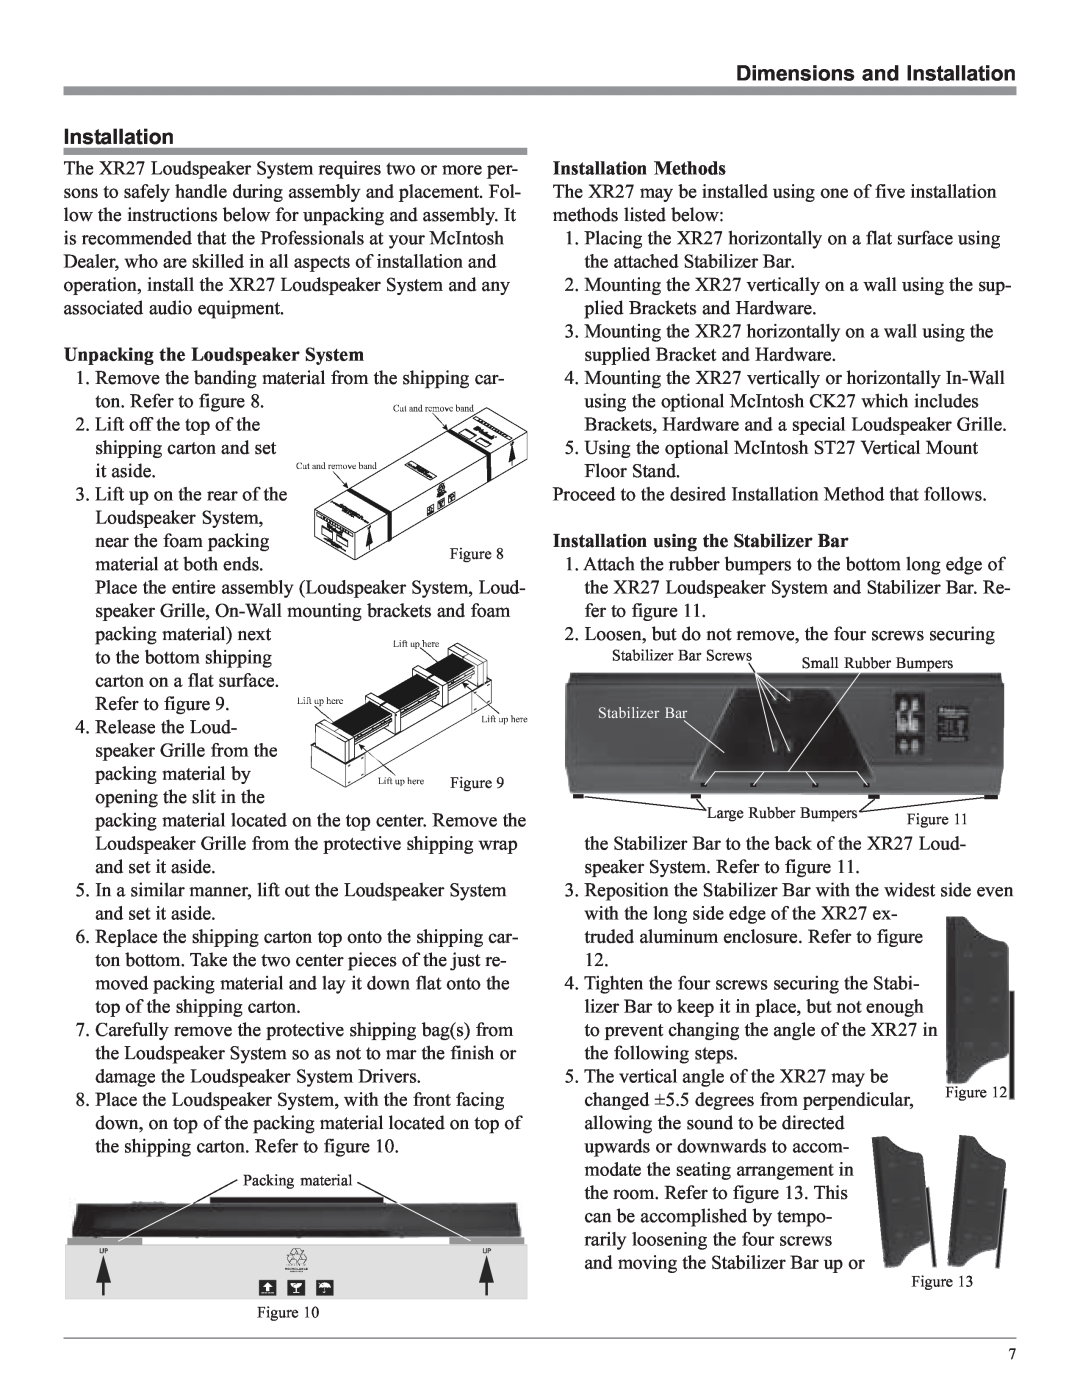 McIntosh XR27 owner manual Dimensions and Installation 